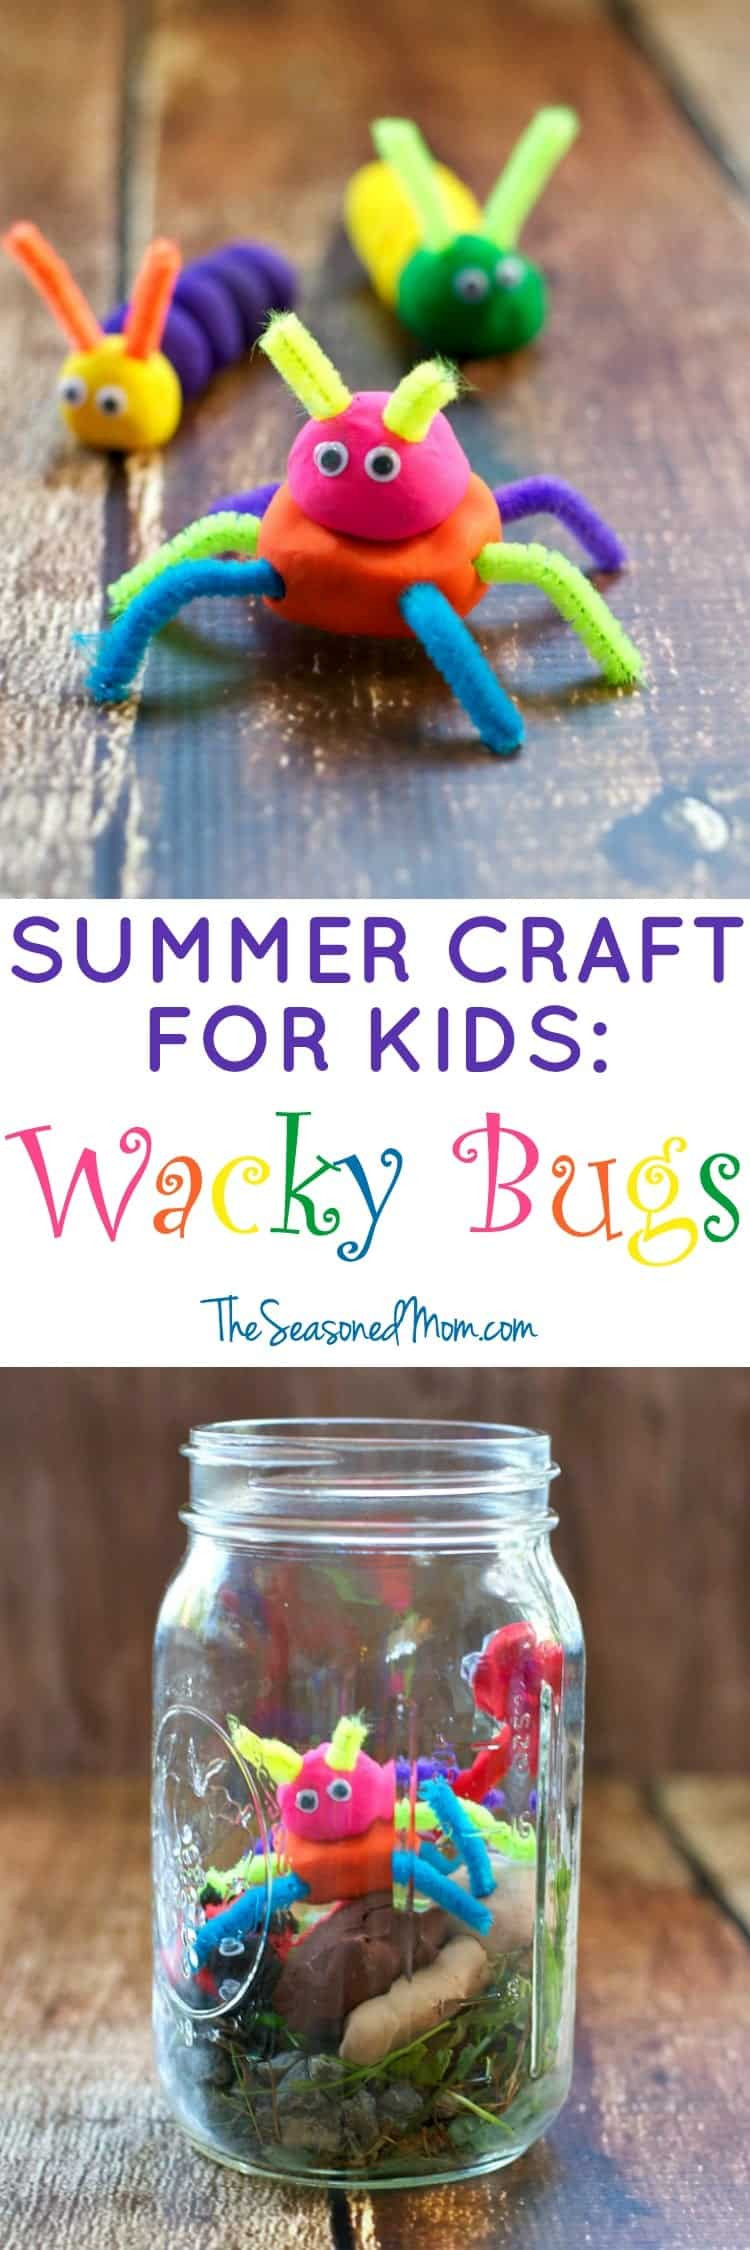 Fun Summer Crafts For Kids
 Summer Craft for Kids Wacky Bugs The Seasoned Mom